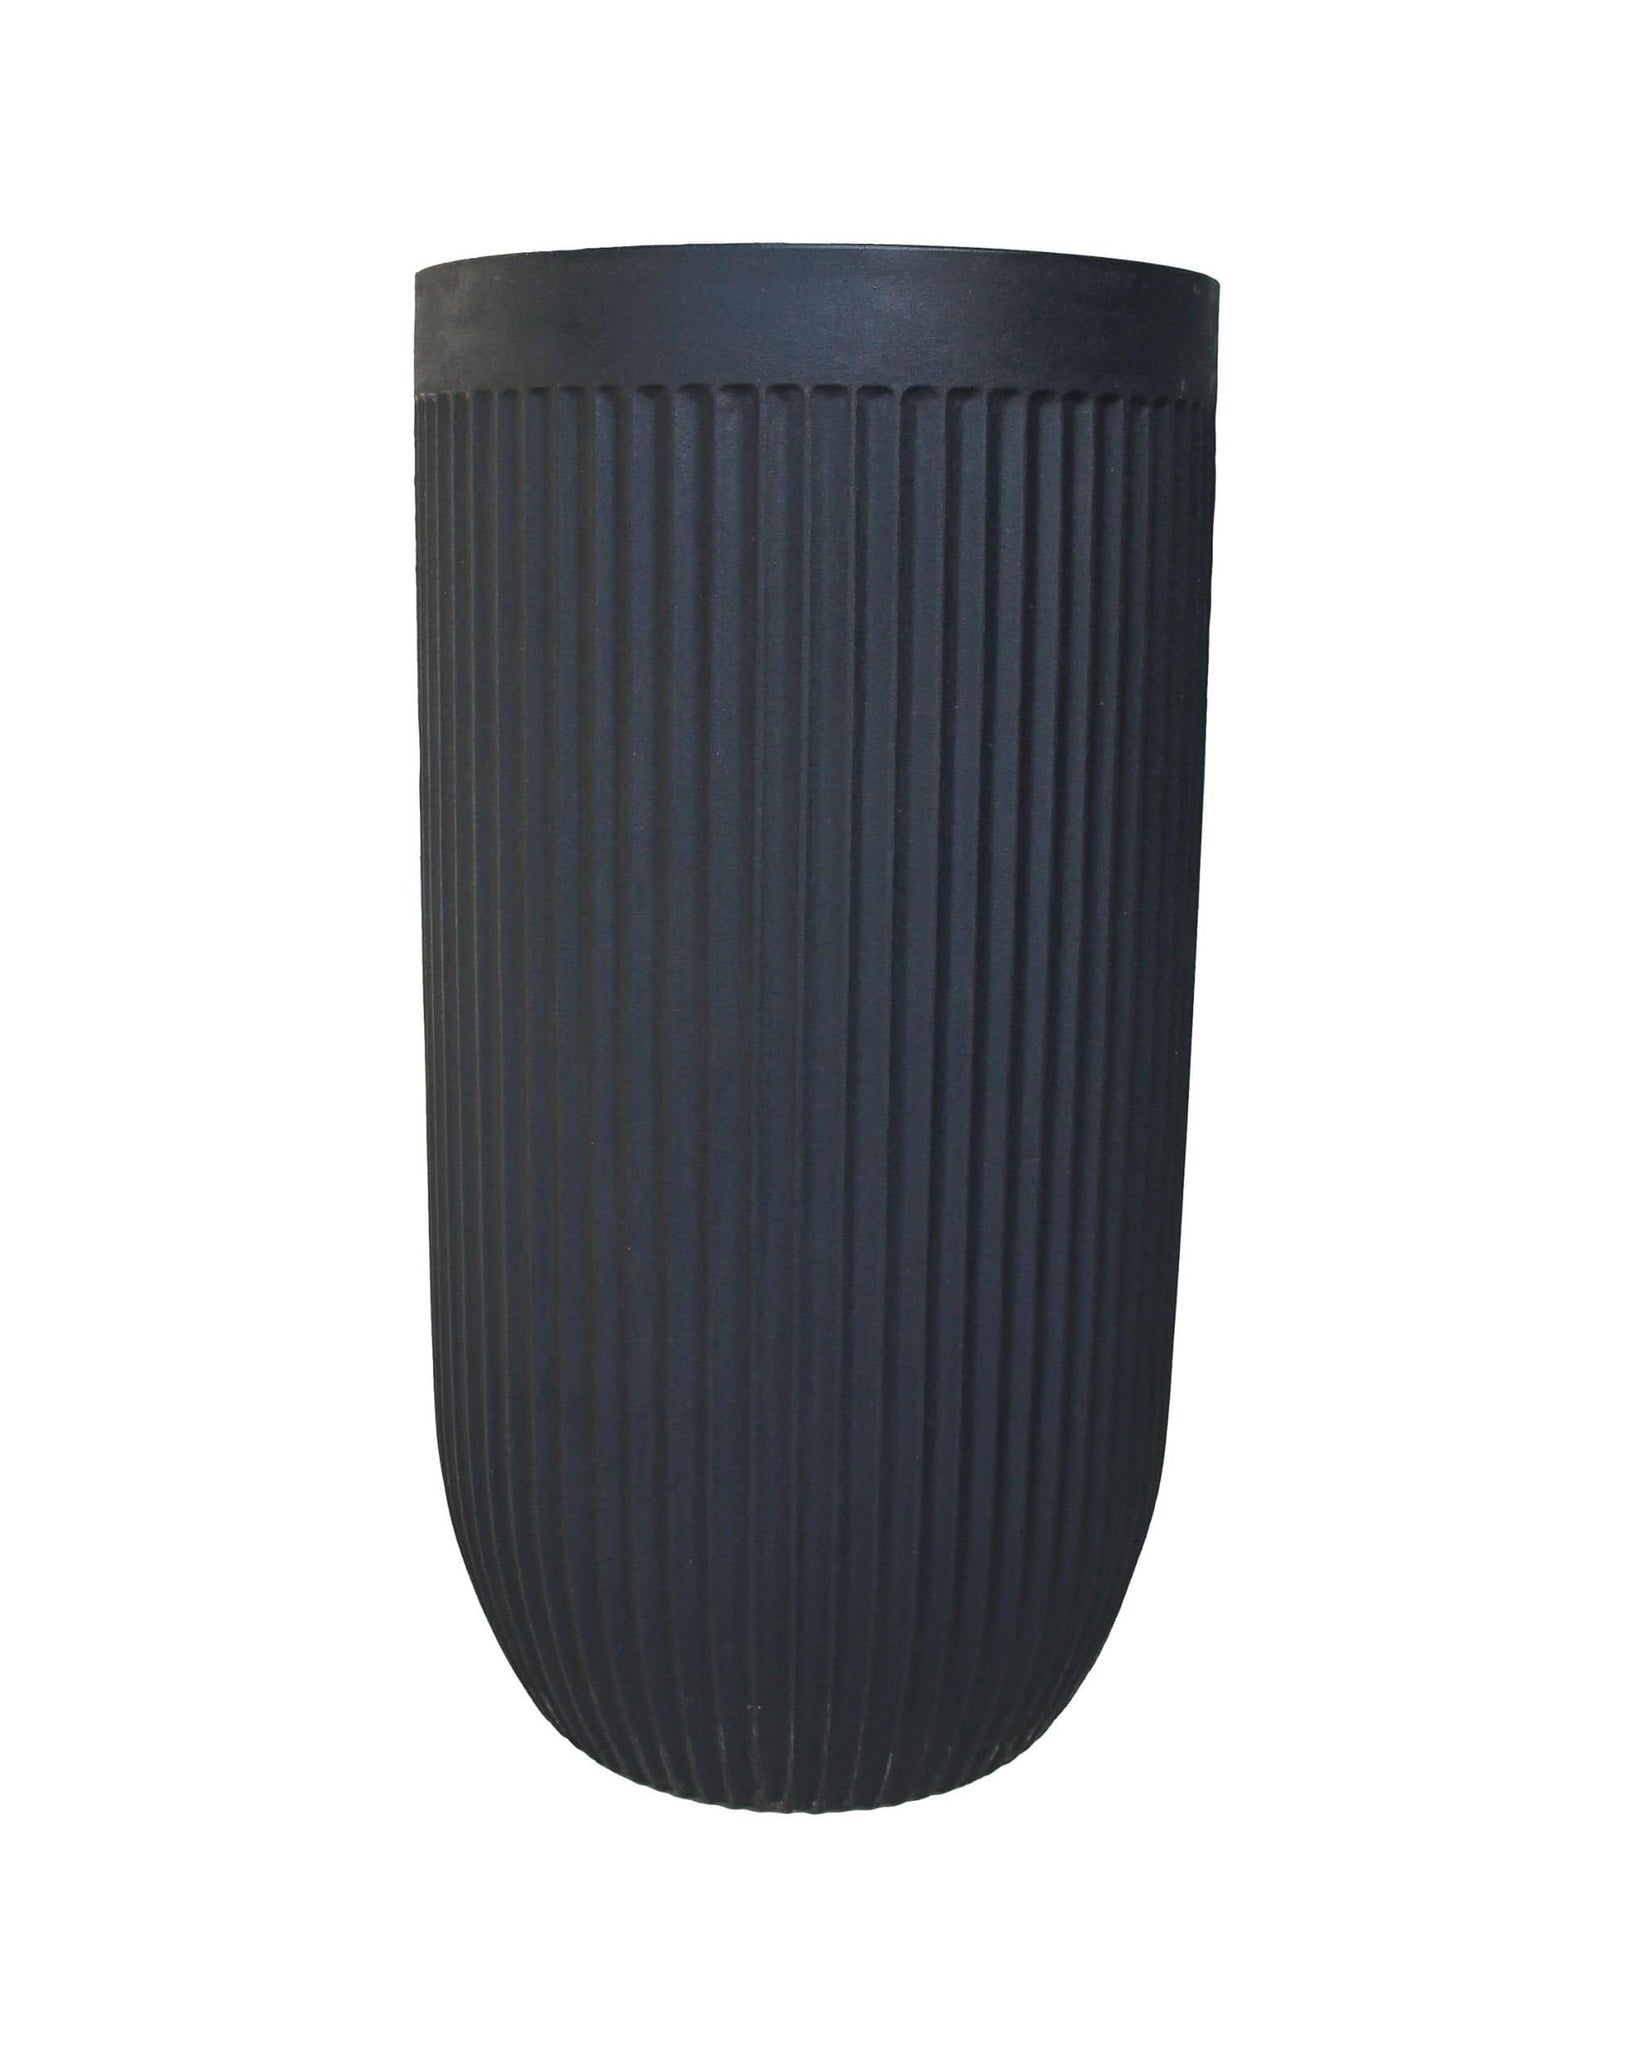 Side view of the tall and elegant planter showing off the unique fluted design in the colour  Lead (black)